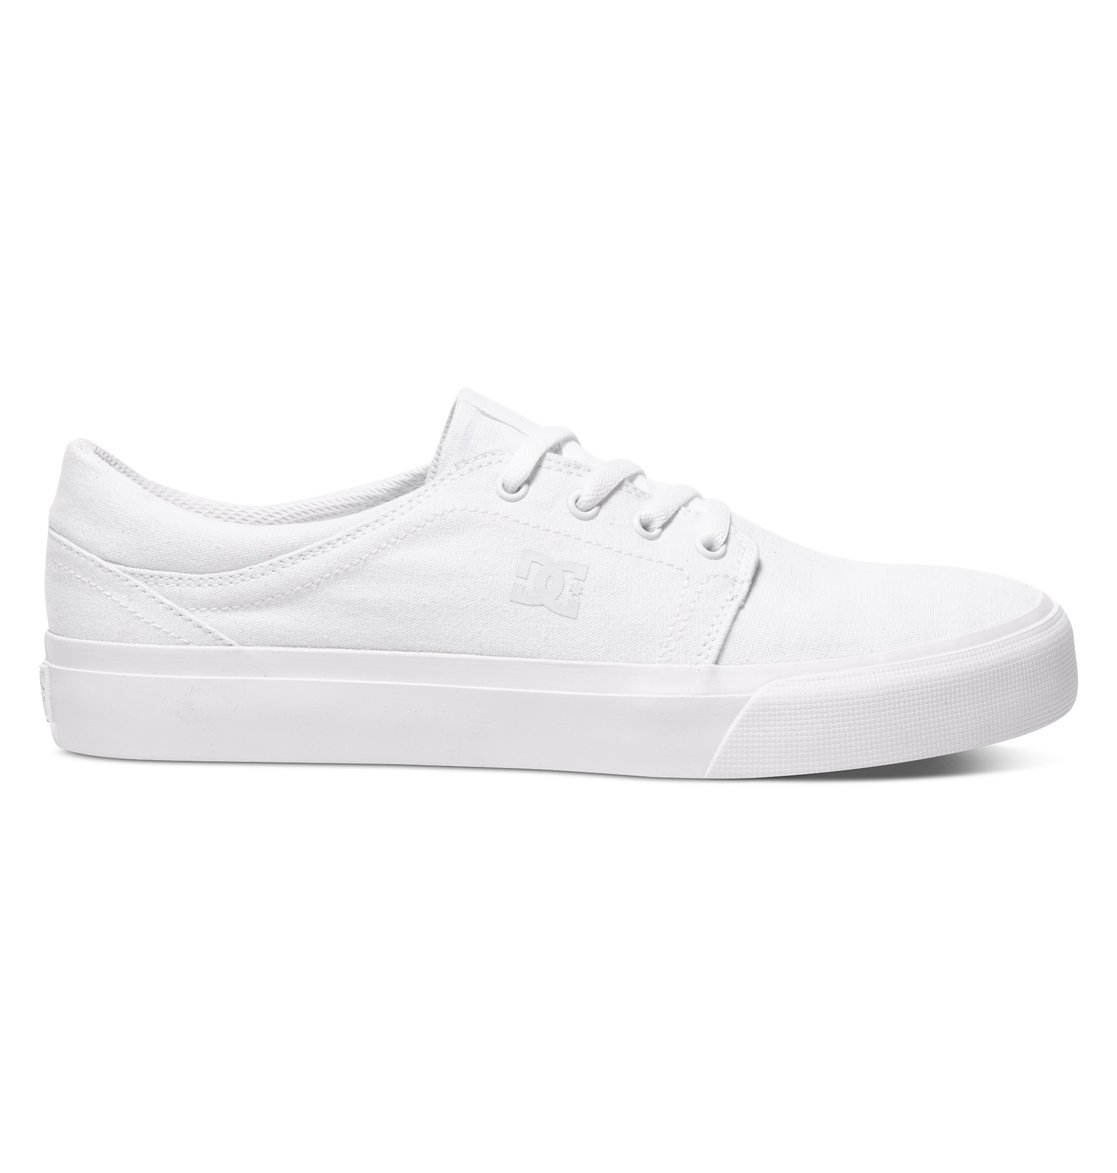 Trase TX Shoes ADYS300126 | DC Shoes